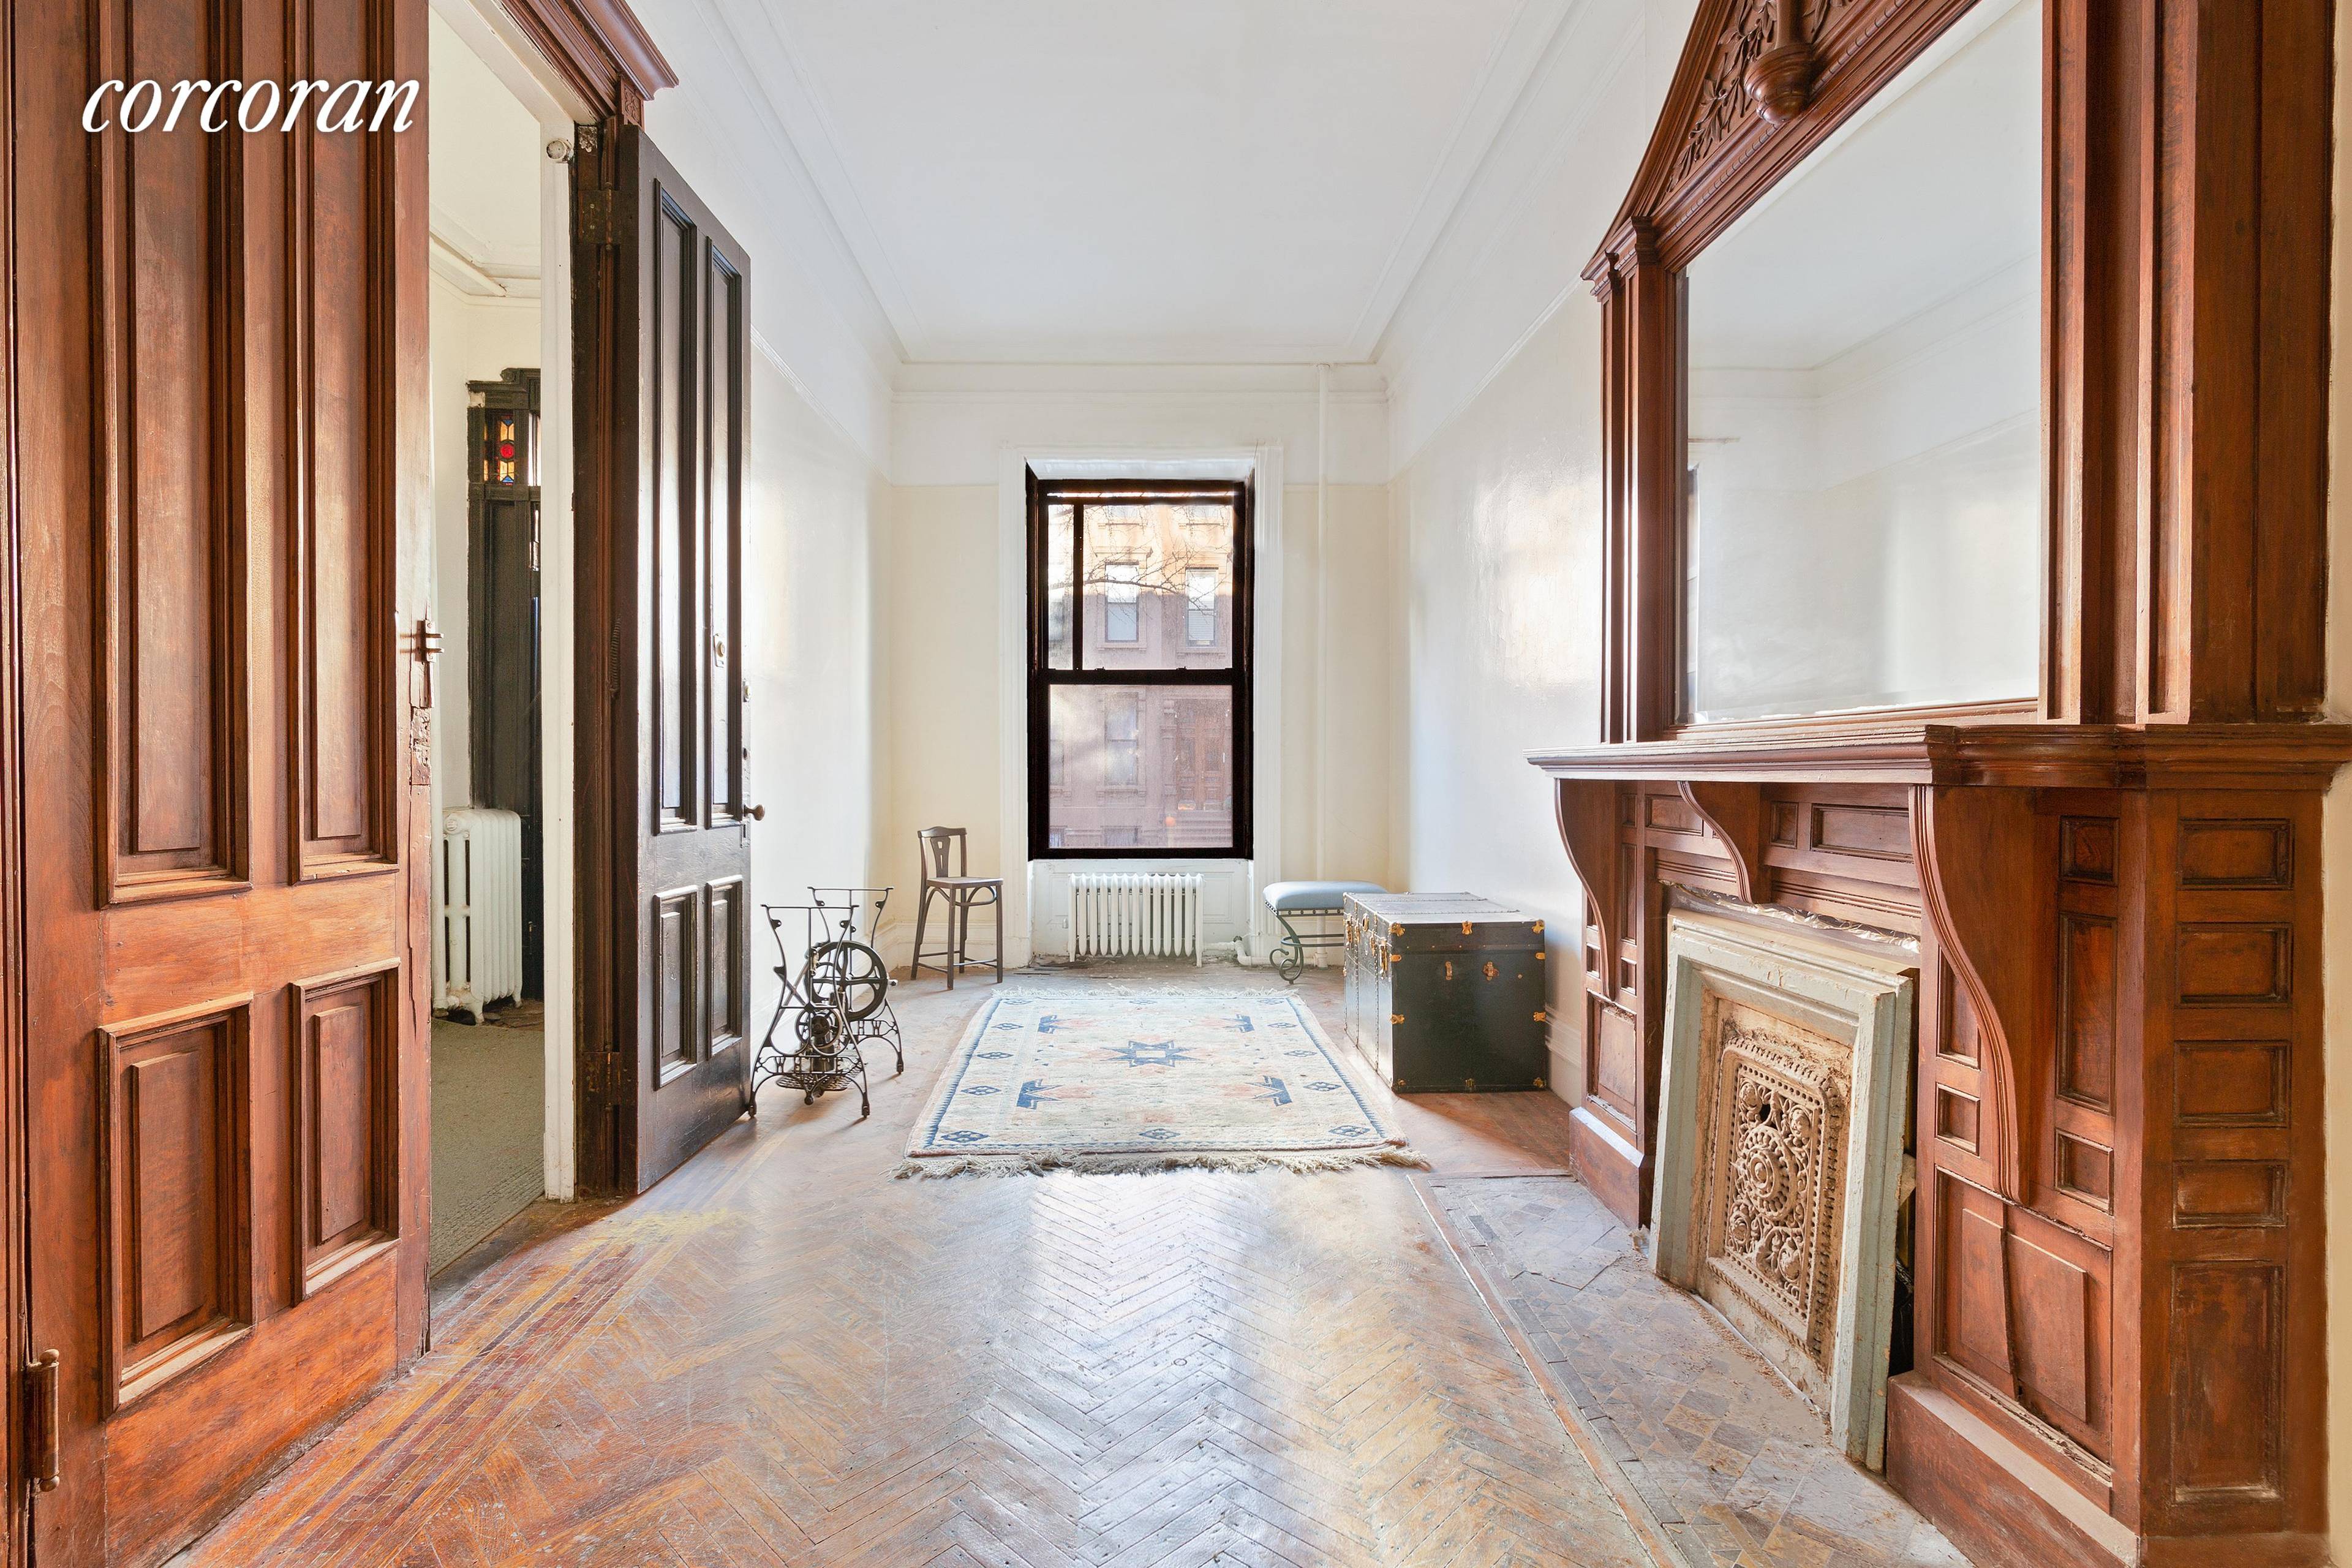 SHOWINGS SUSPENDED UNTIL FURTHER NOTICE This classic Central Harlem townhouse, full of original detail, is ready to be brought back to its historic splendor.